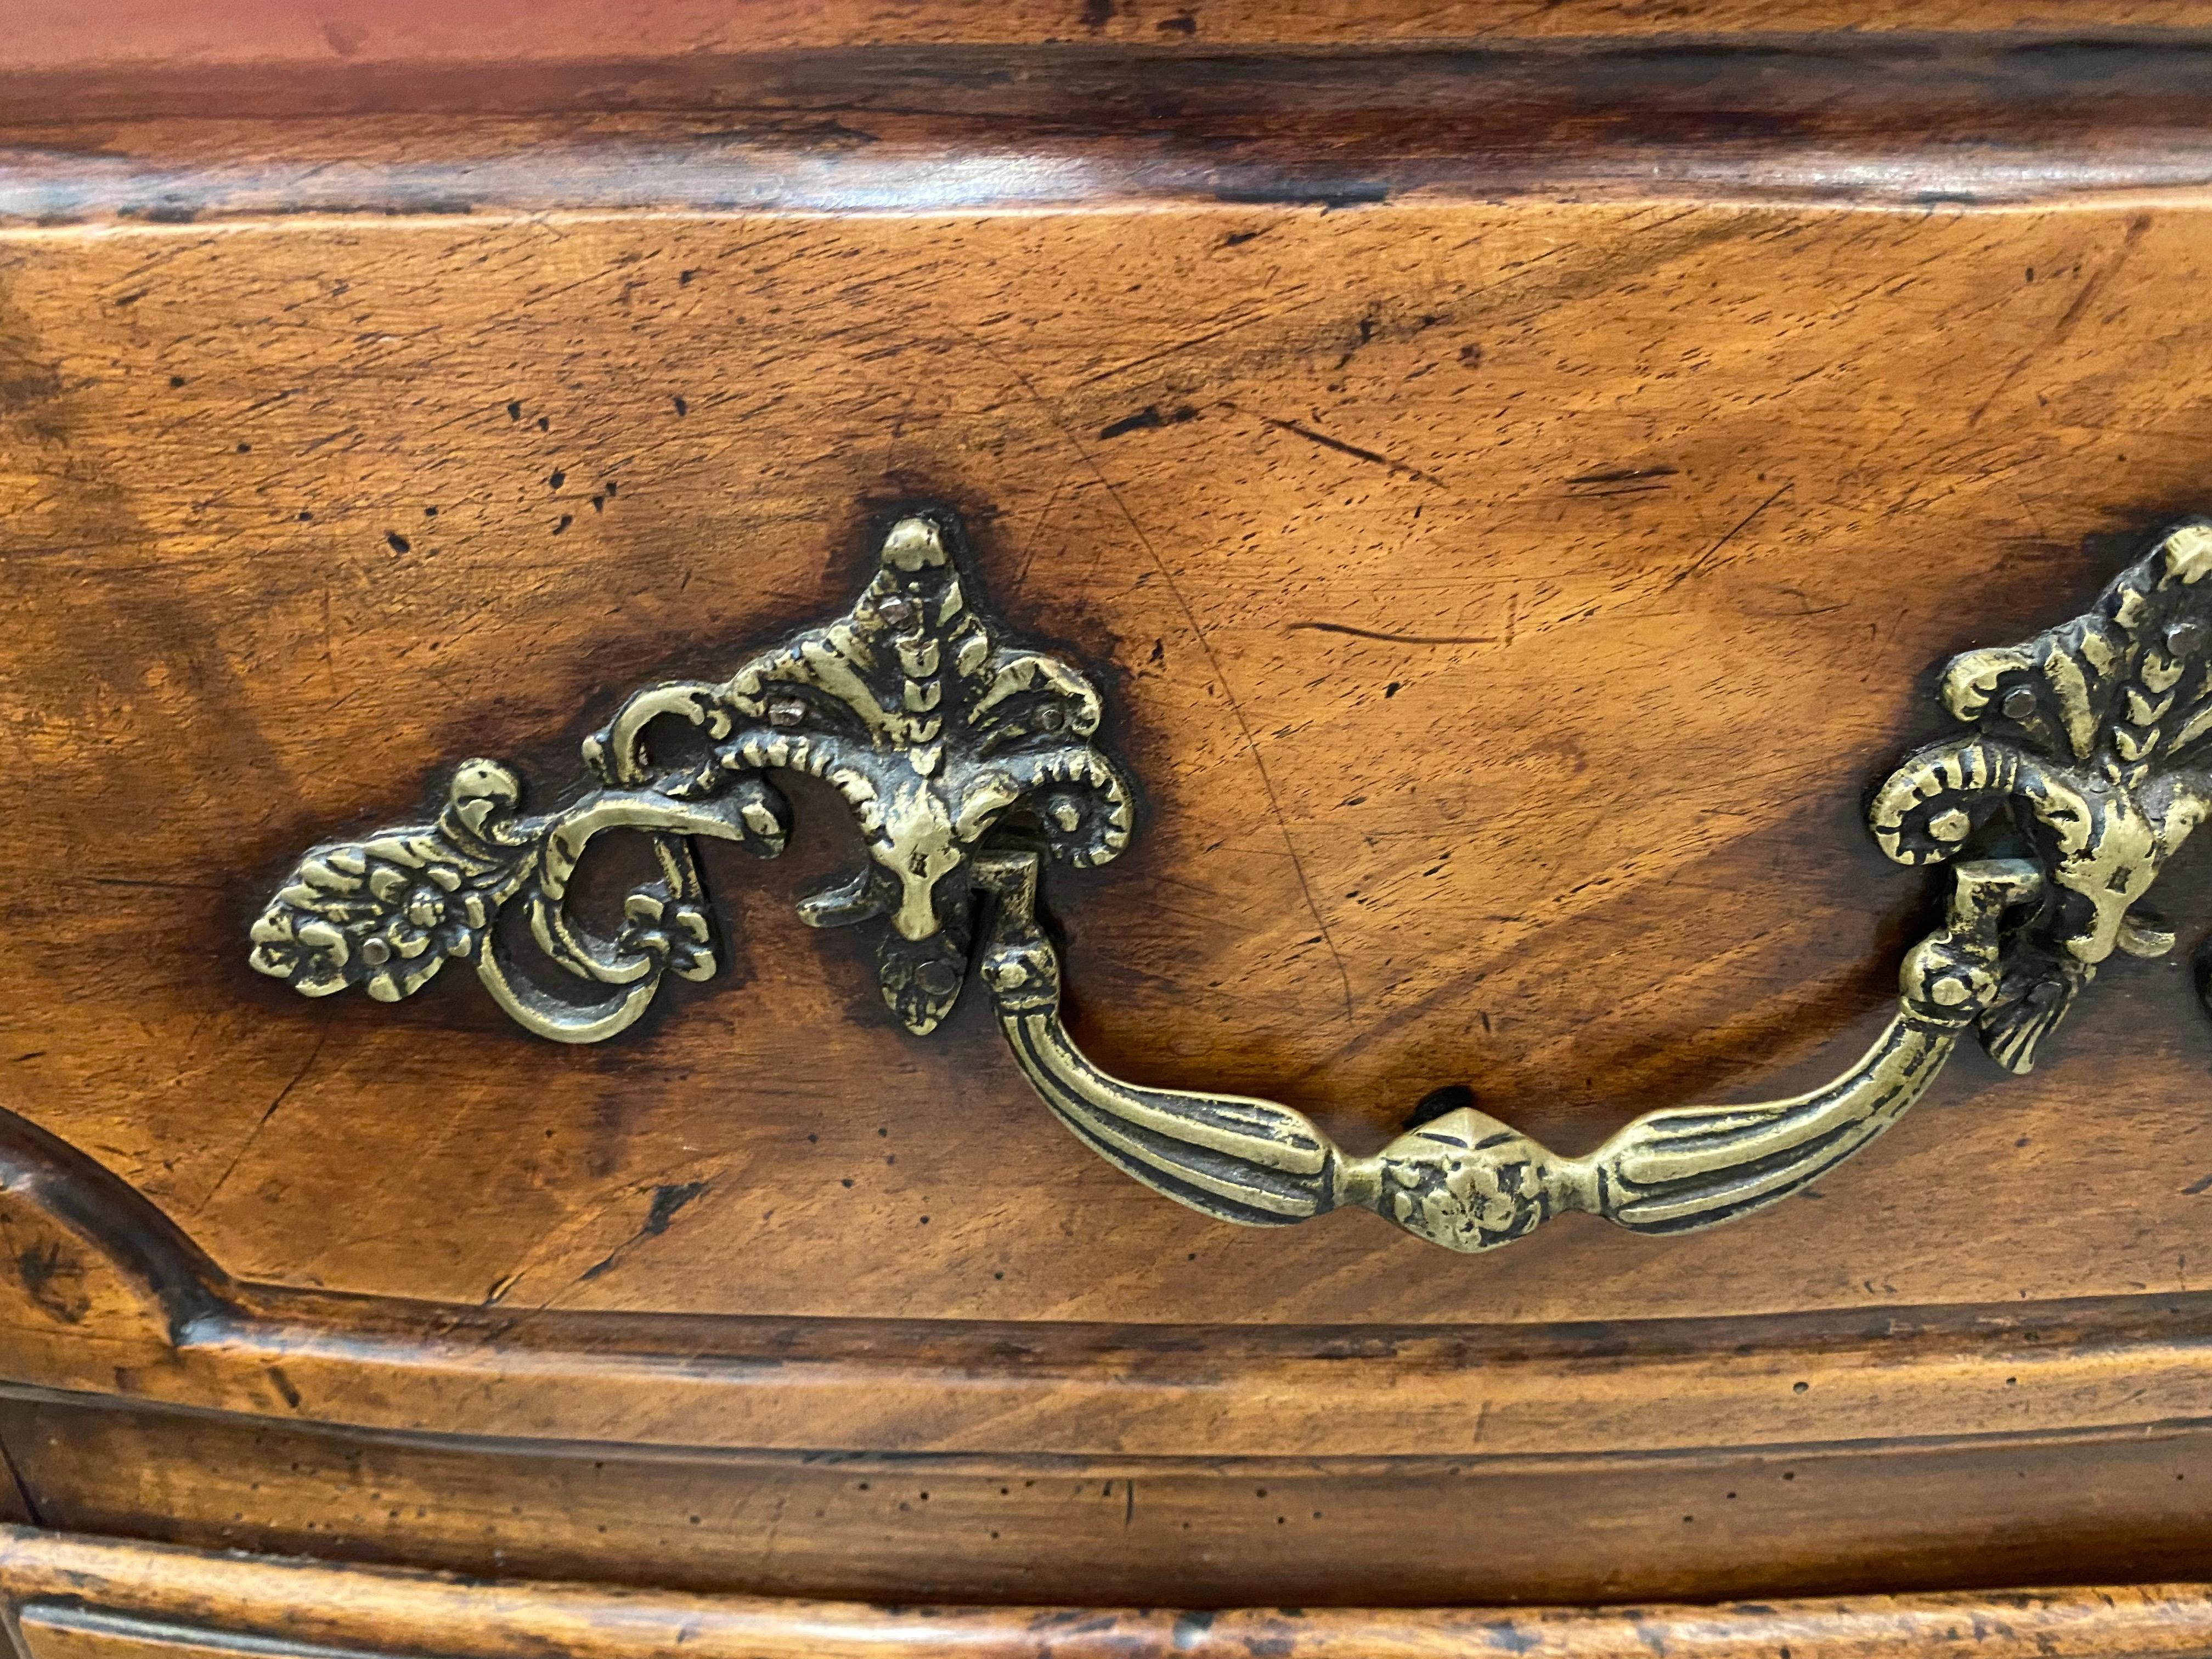 Period chest of drawers 
Late 18th century 
Solid walnut
Original bronzes
Measures: 139 W x 65 D x 90 H 
1900 euros.